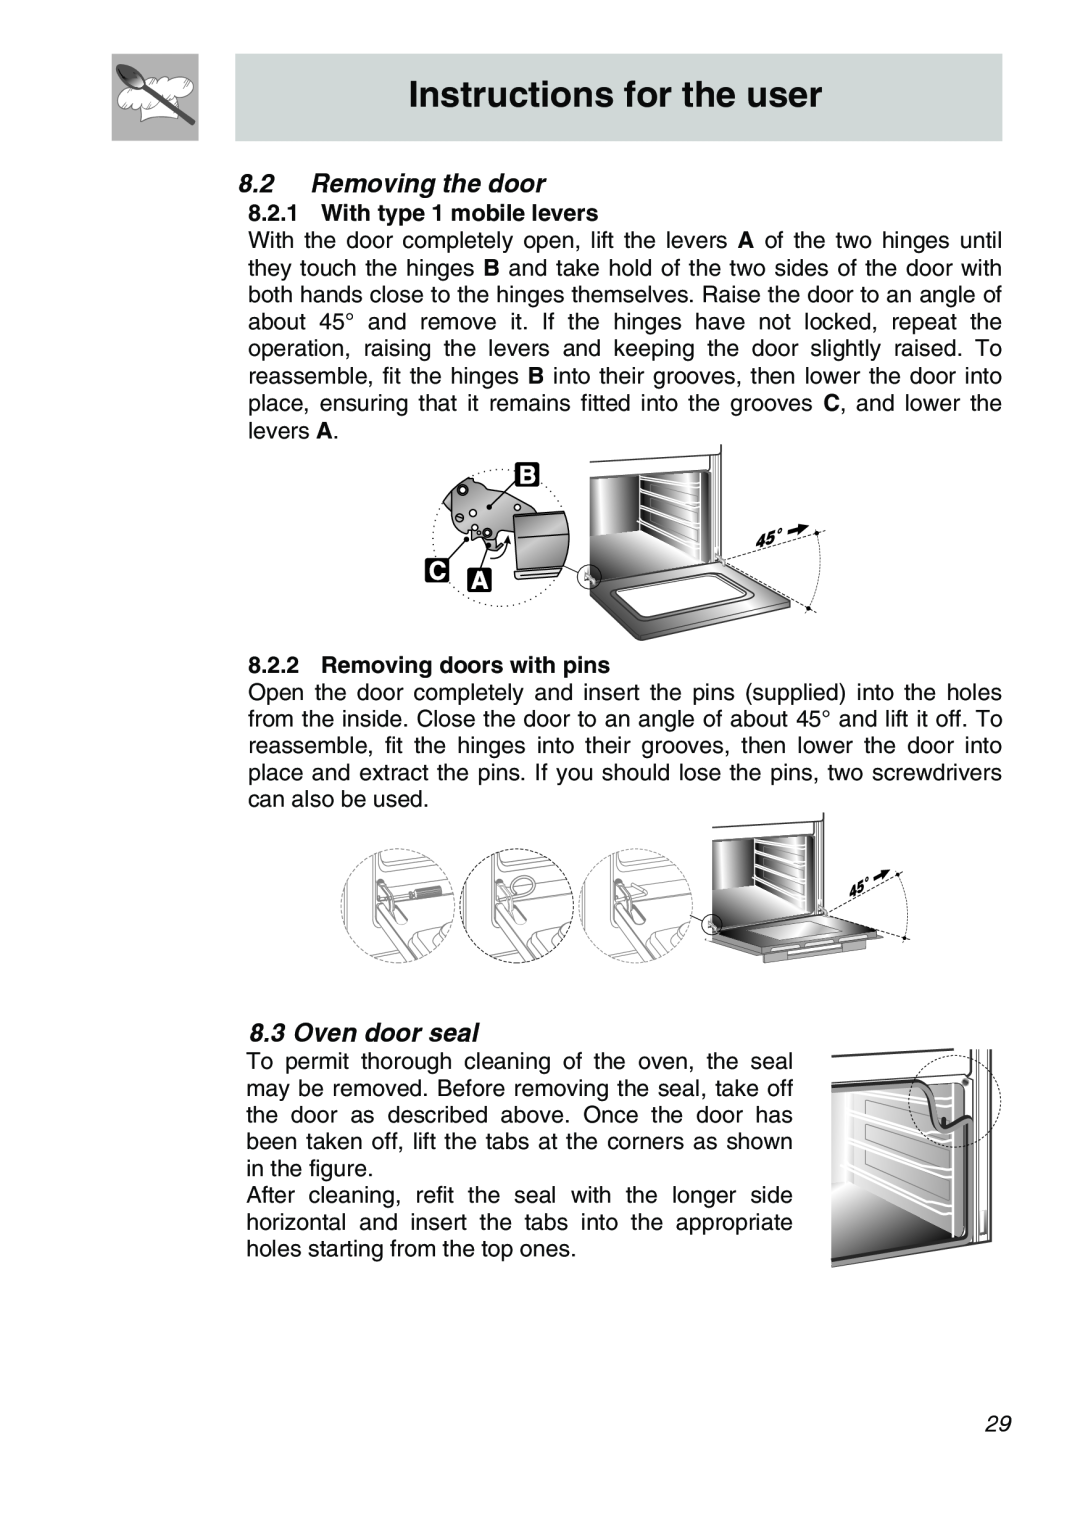 Smeg SA705X-7, SA707X-7 8.2Removing the door, Oven door seal, Instructions for the user, 8.2.1With type 1 mobile levers 